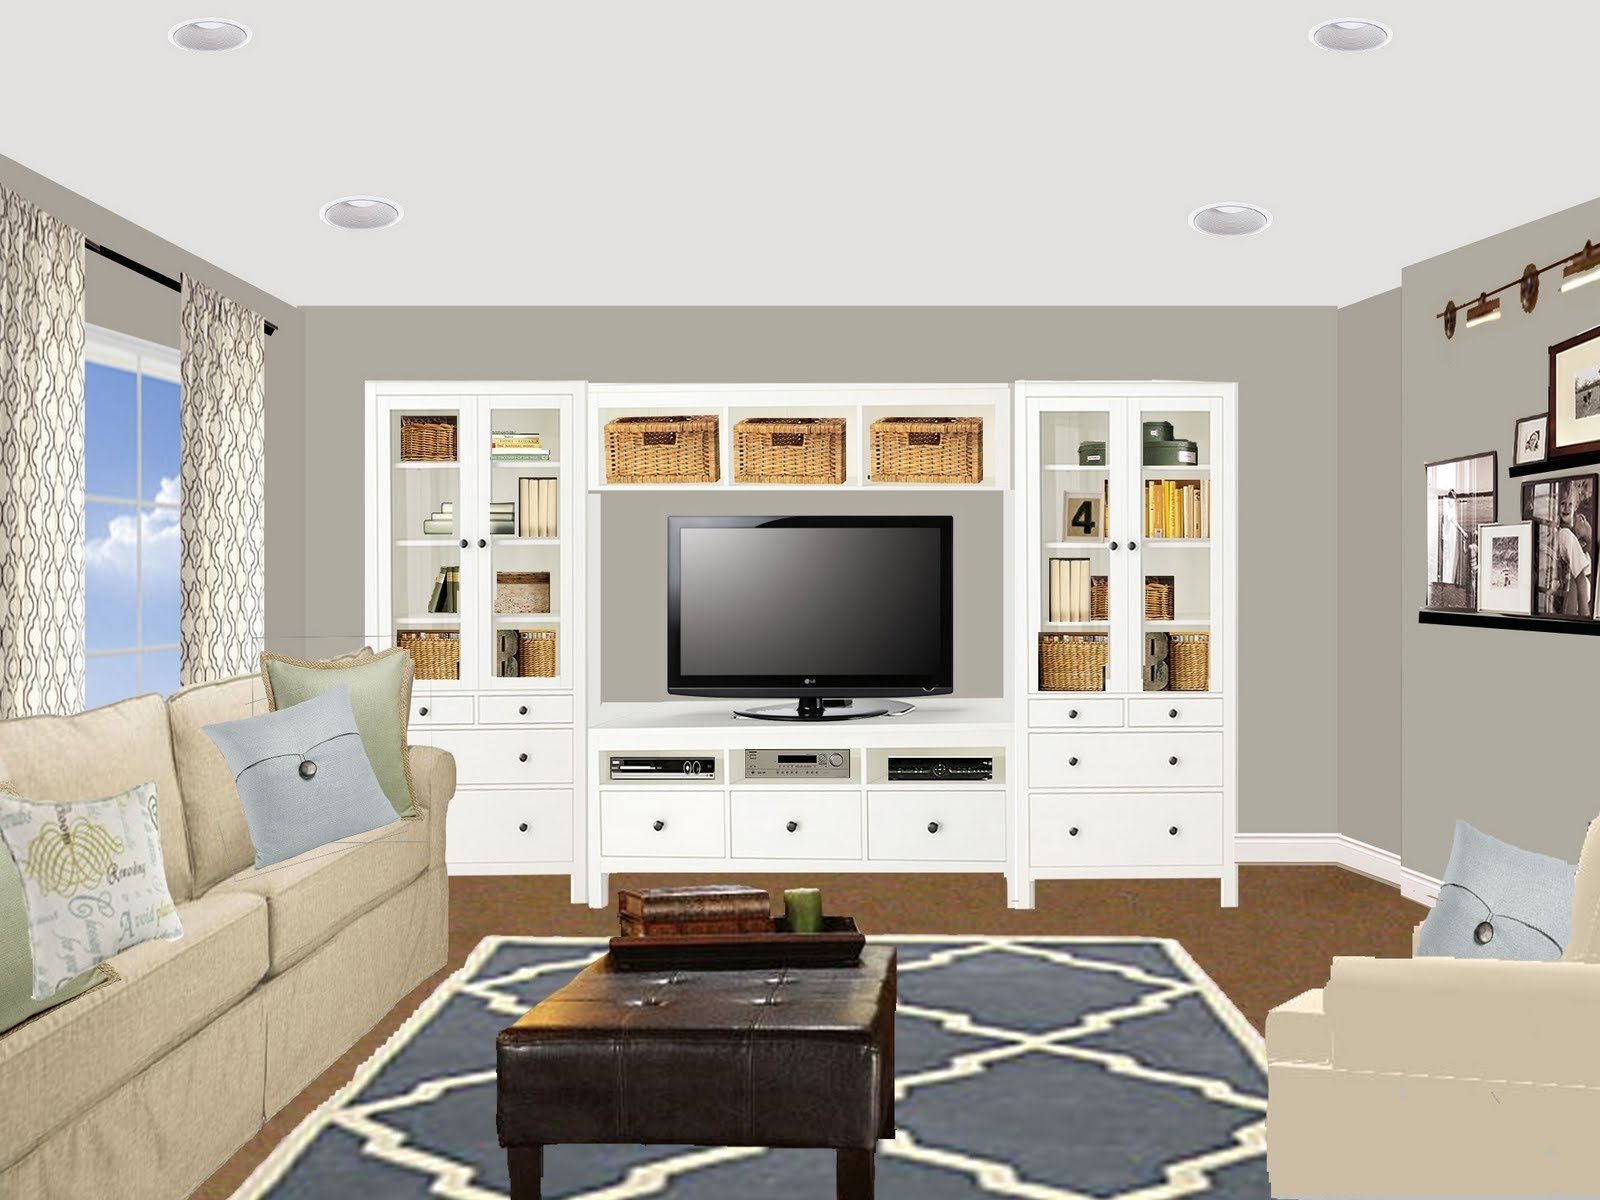 10 Stylish Wall Decor Ideas For Family Room basement entertainment room decorating ideas lounge awesome 2022